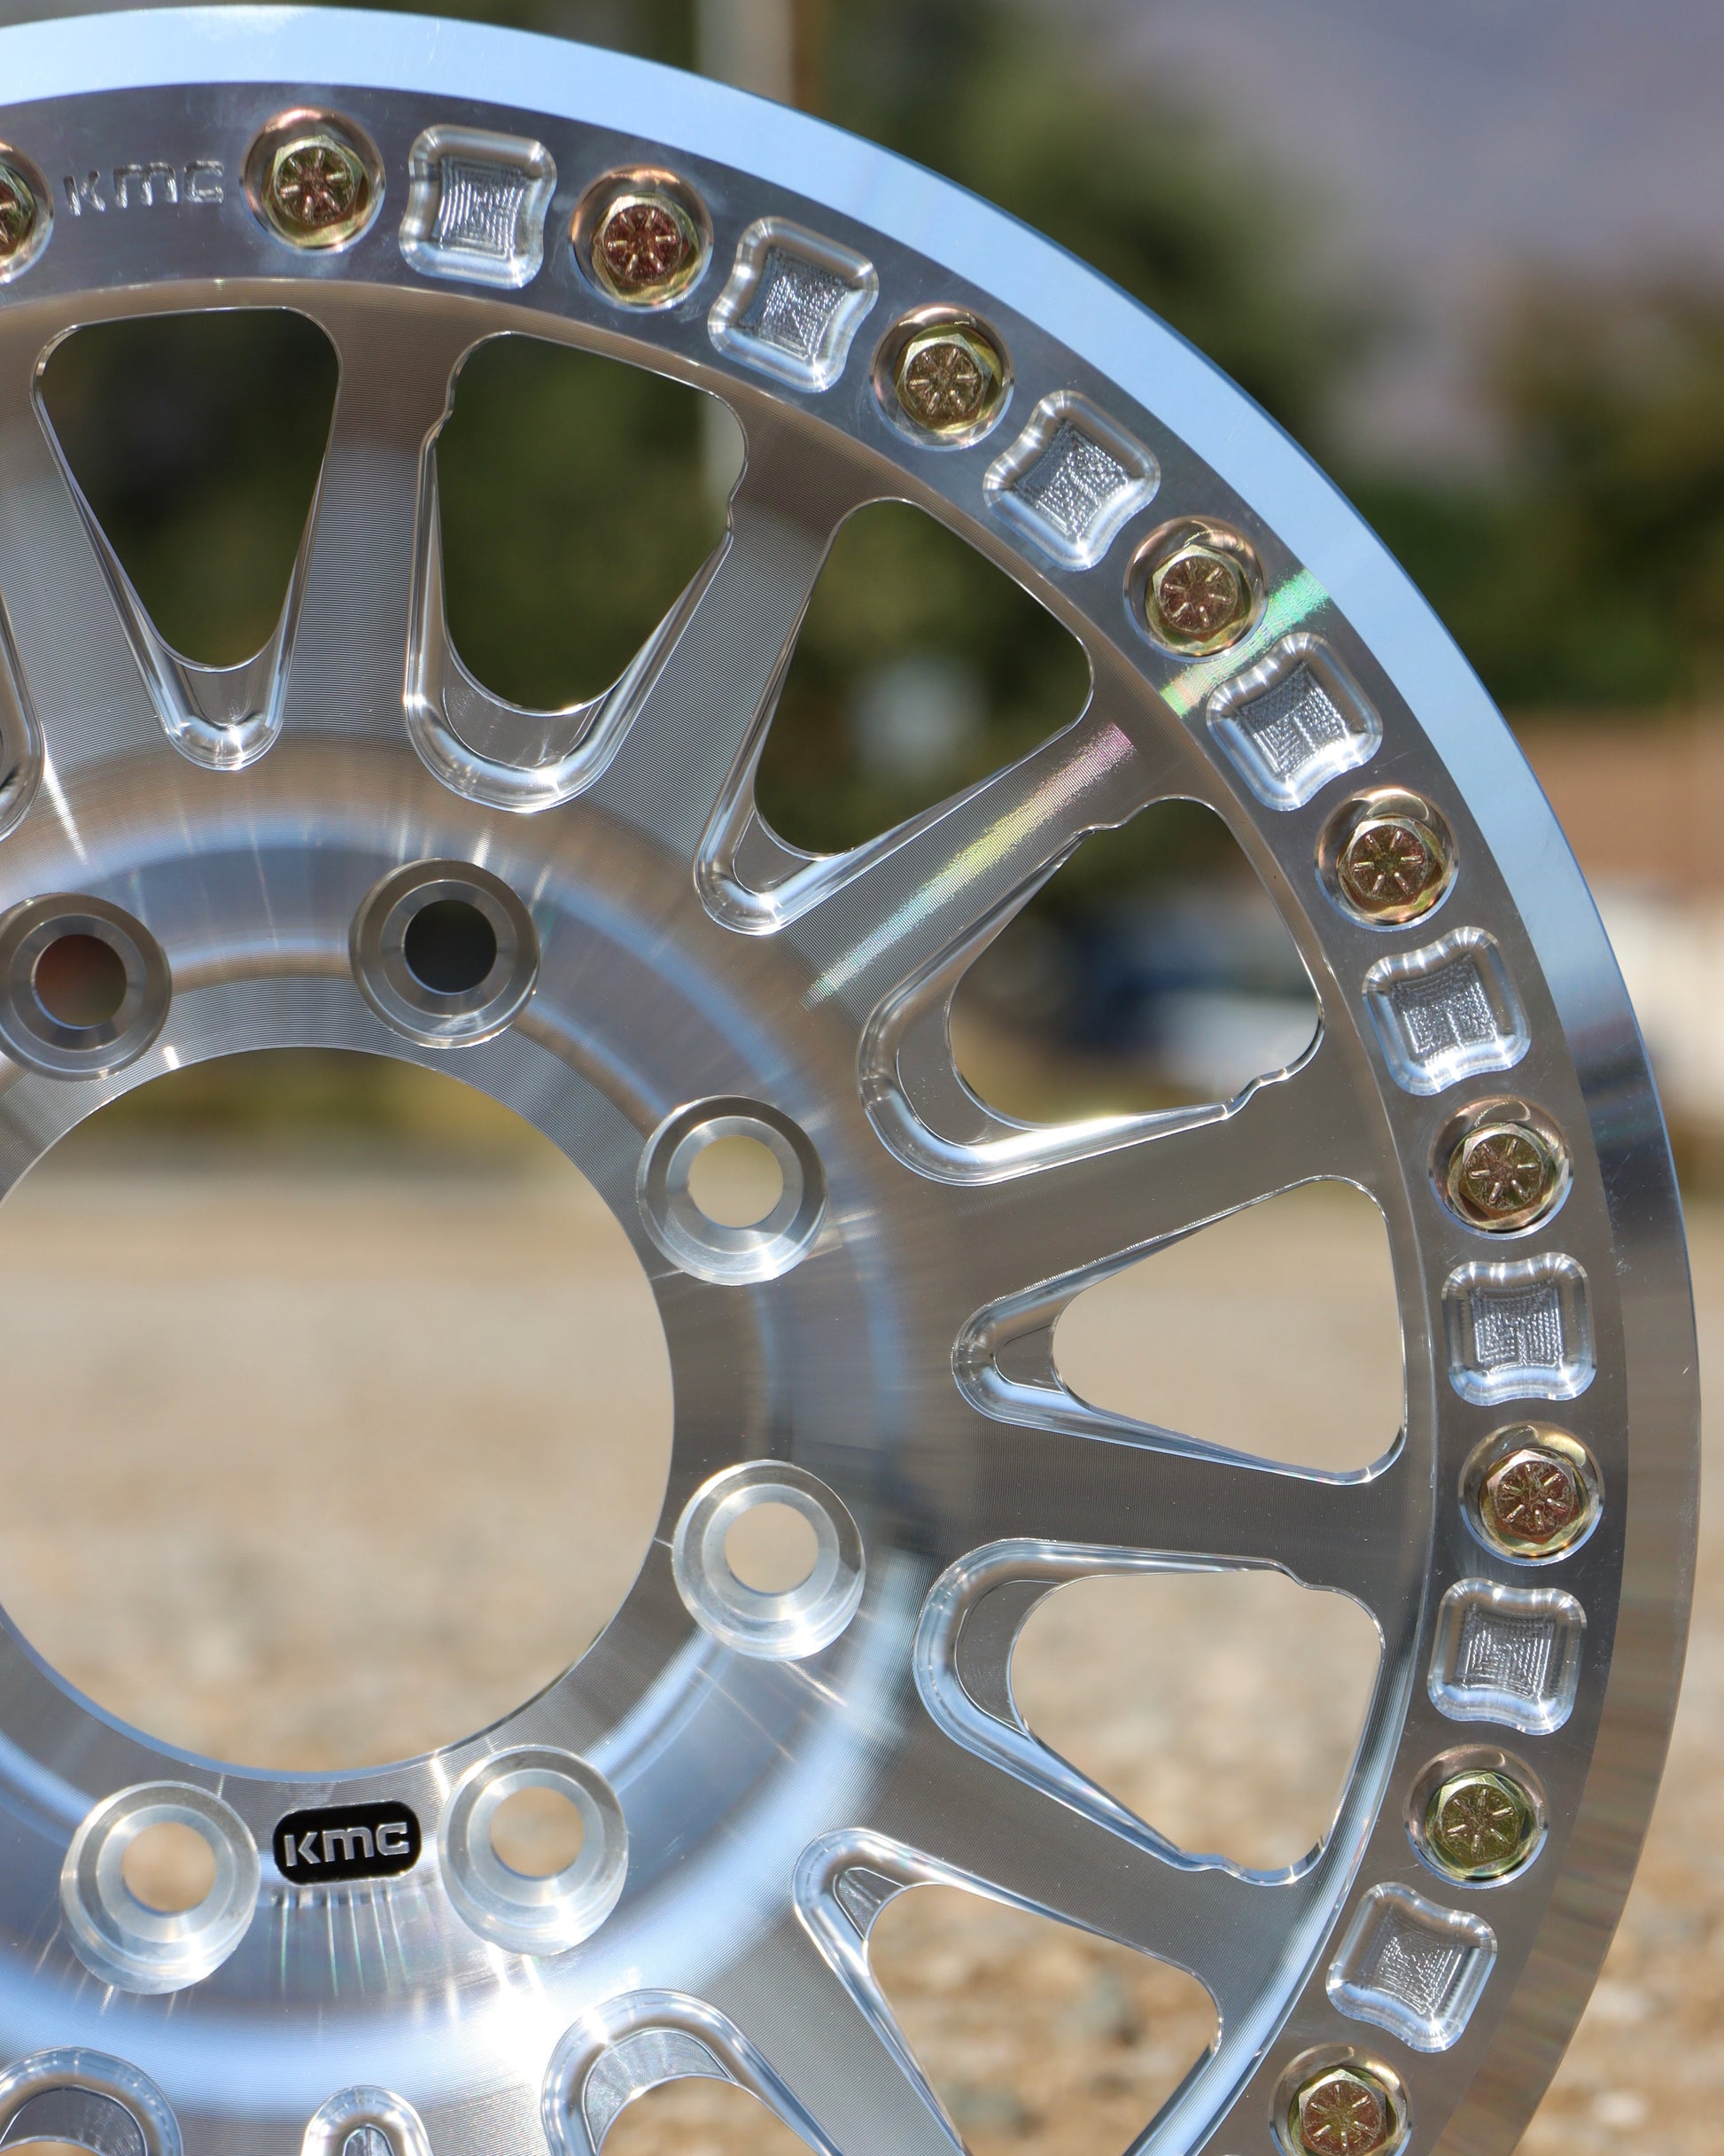 Close-up of the kmc impact forged bead lock wheel with blurred trees in the background.